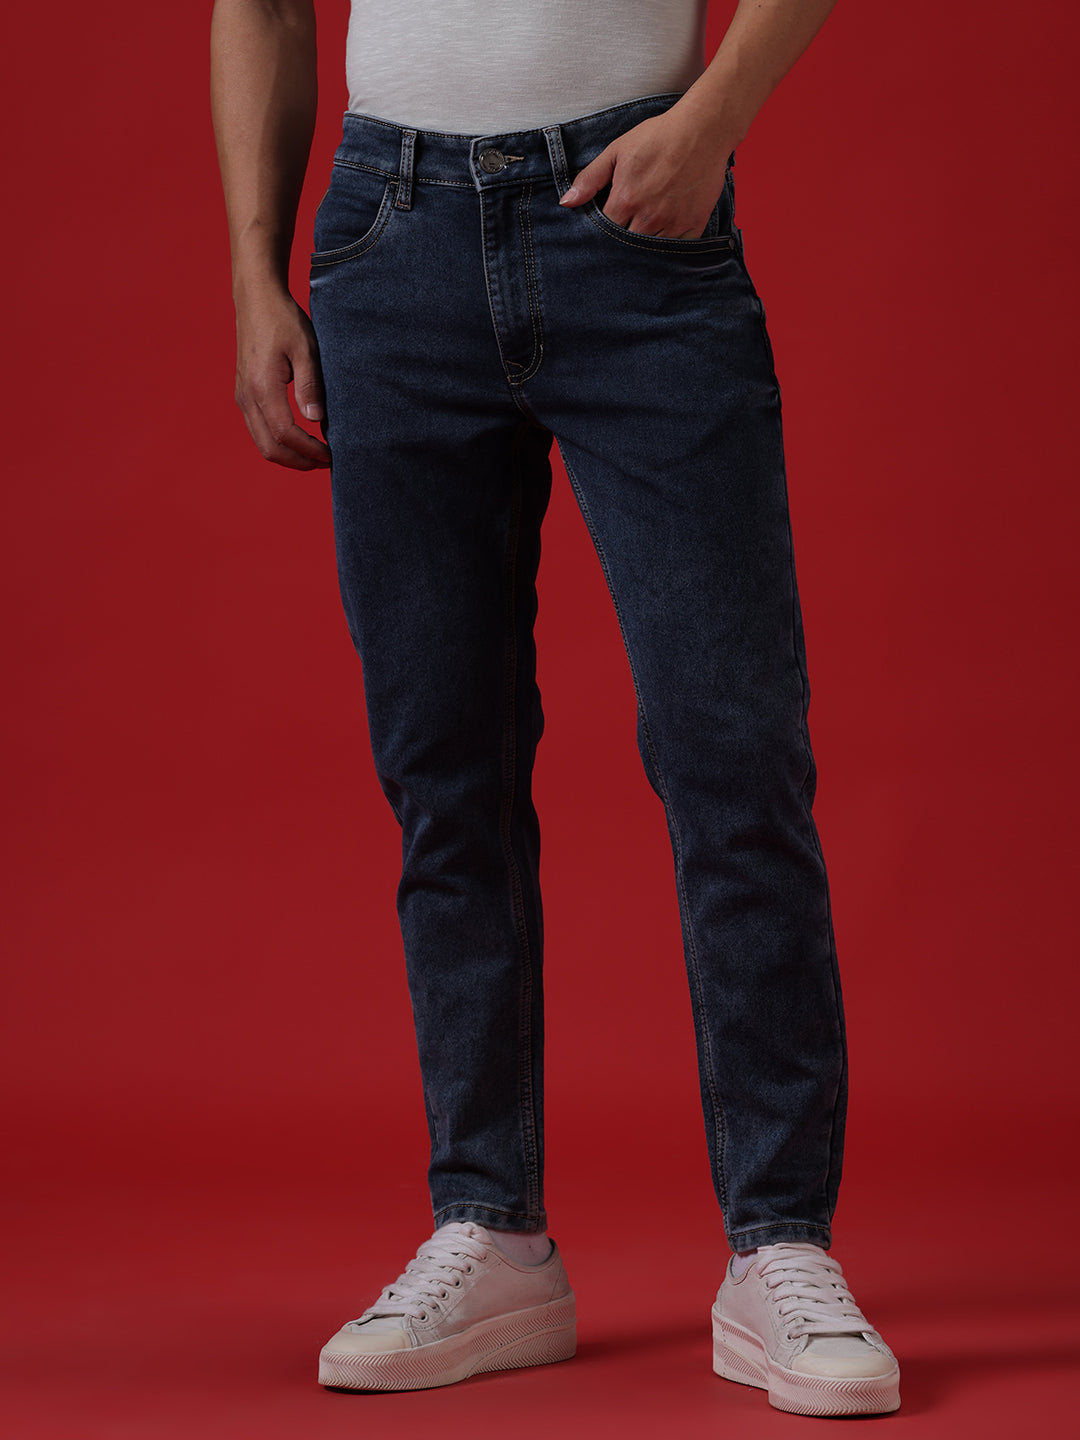 Buy Men's Jeans Online  For Every Day, Every Way - WROGN – Wrogn